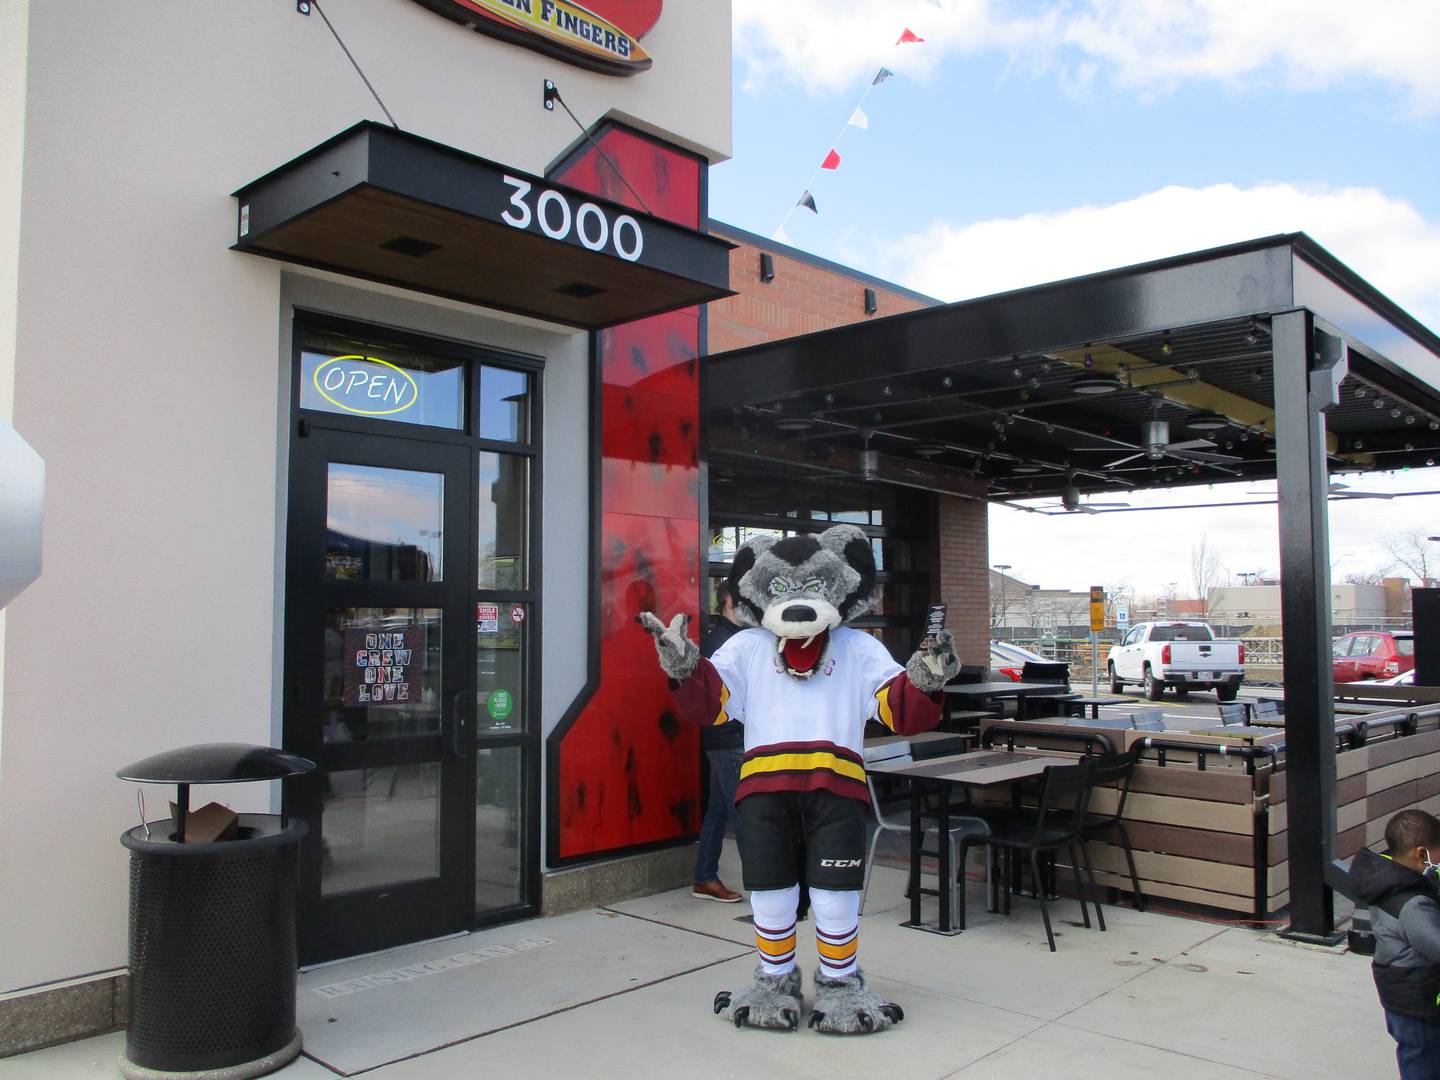 The mascot for the Chicago Wolves hockey team makes an appearance at the Raising Cane's Chicken Fingers opening in Joliet on Tuesday, March 8, 2022.